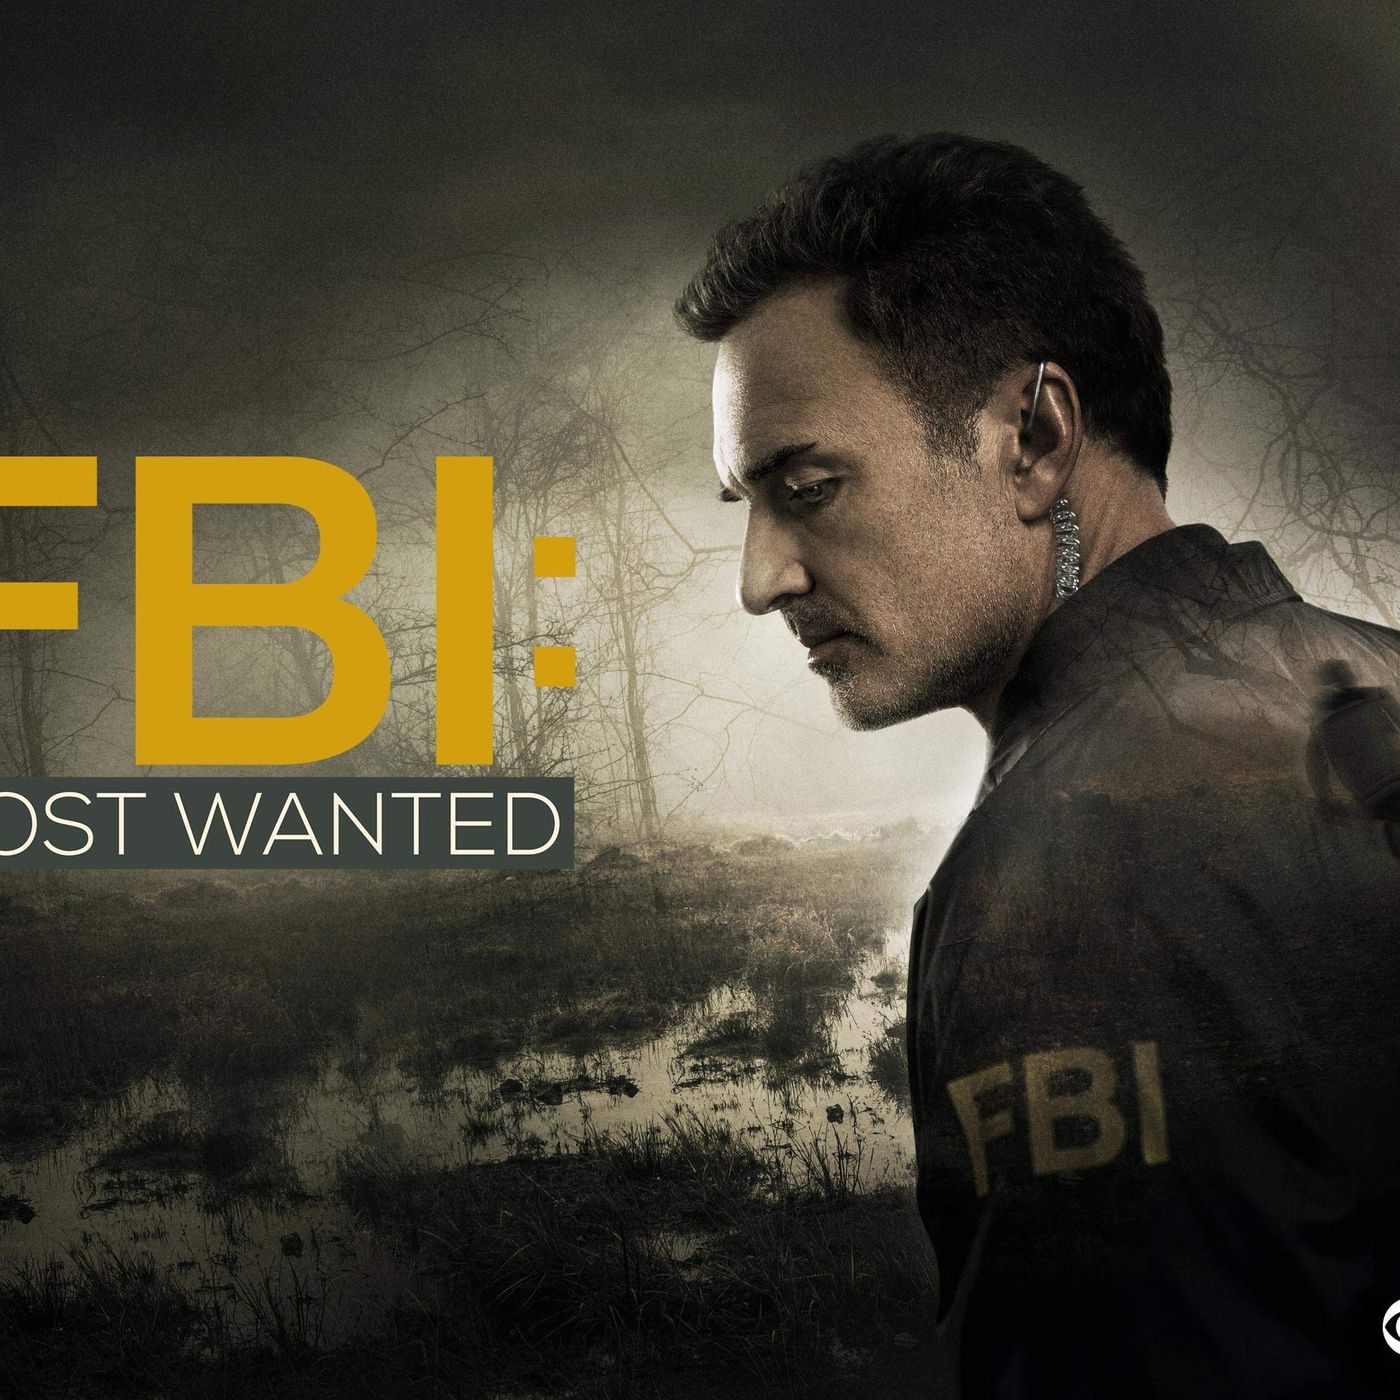 FBI Most Wanted: Feeling Invisible